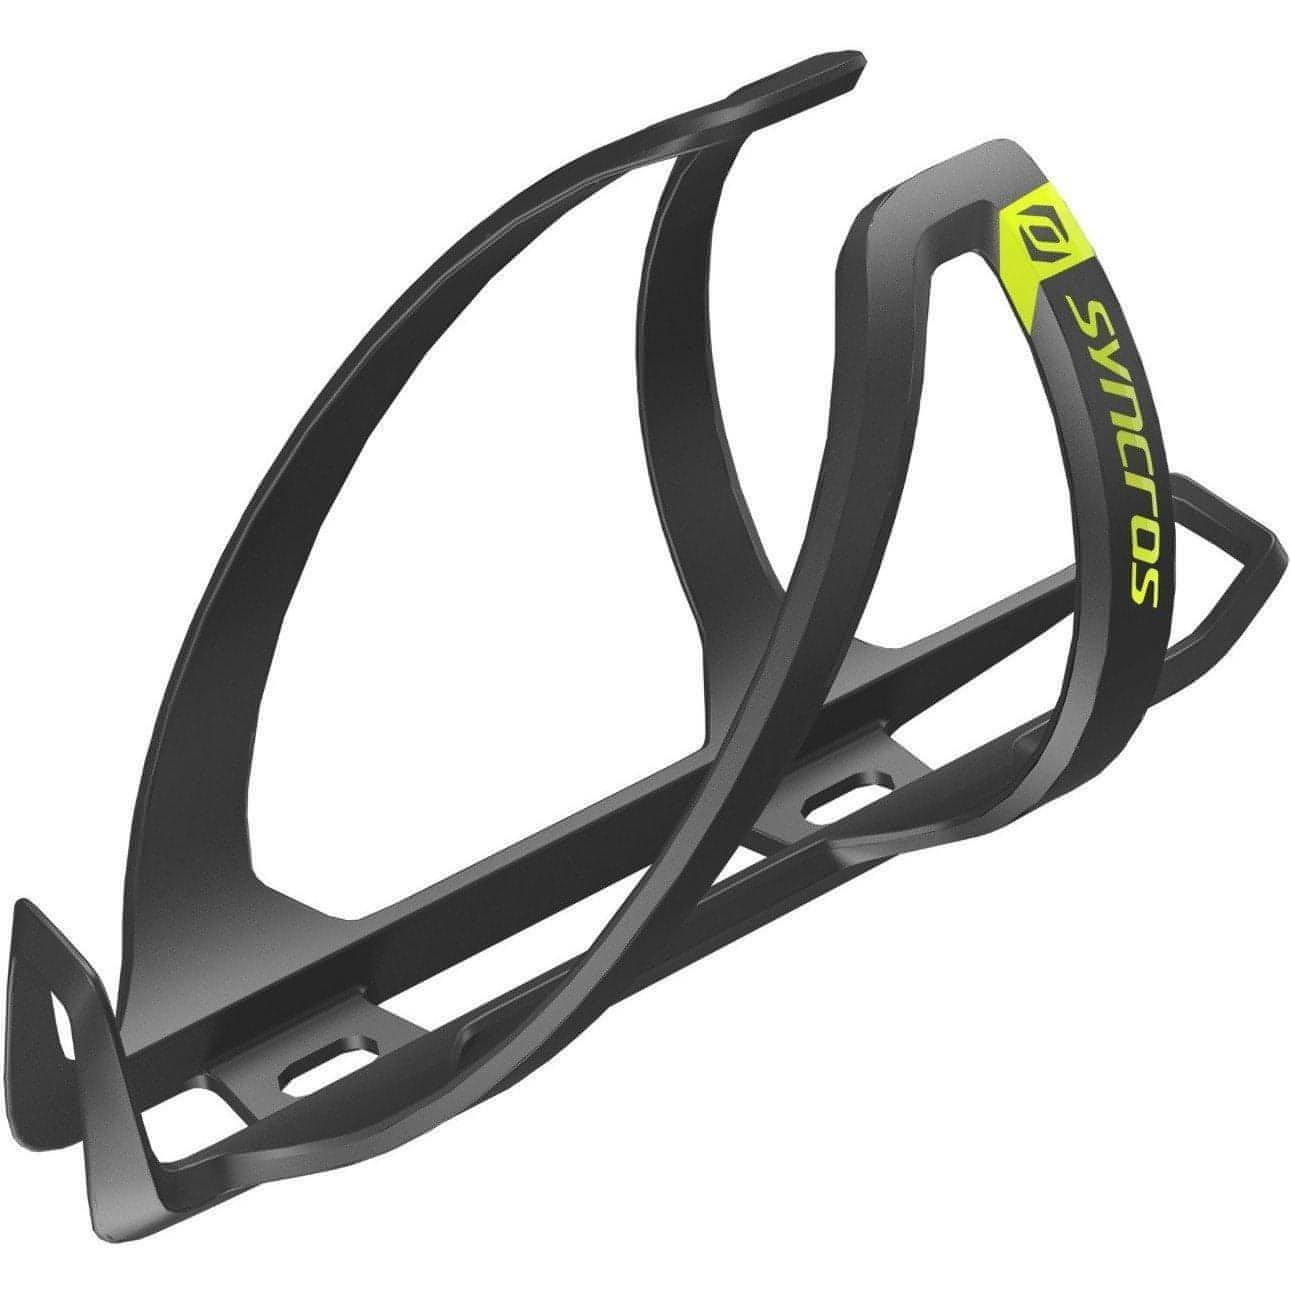 Syncros 1.0 Coupe Bottle Cage - Yellow 7613368787440 - Start Fitness